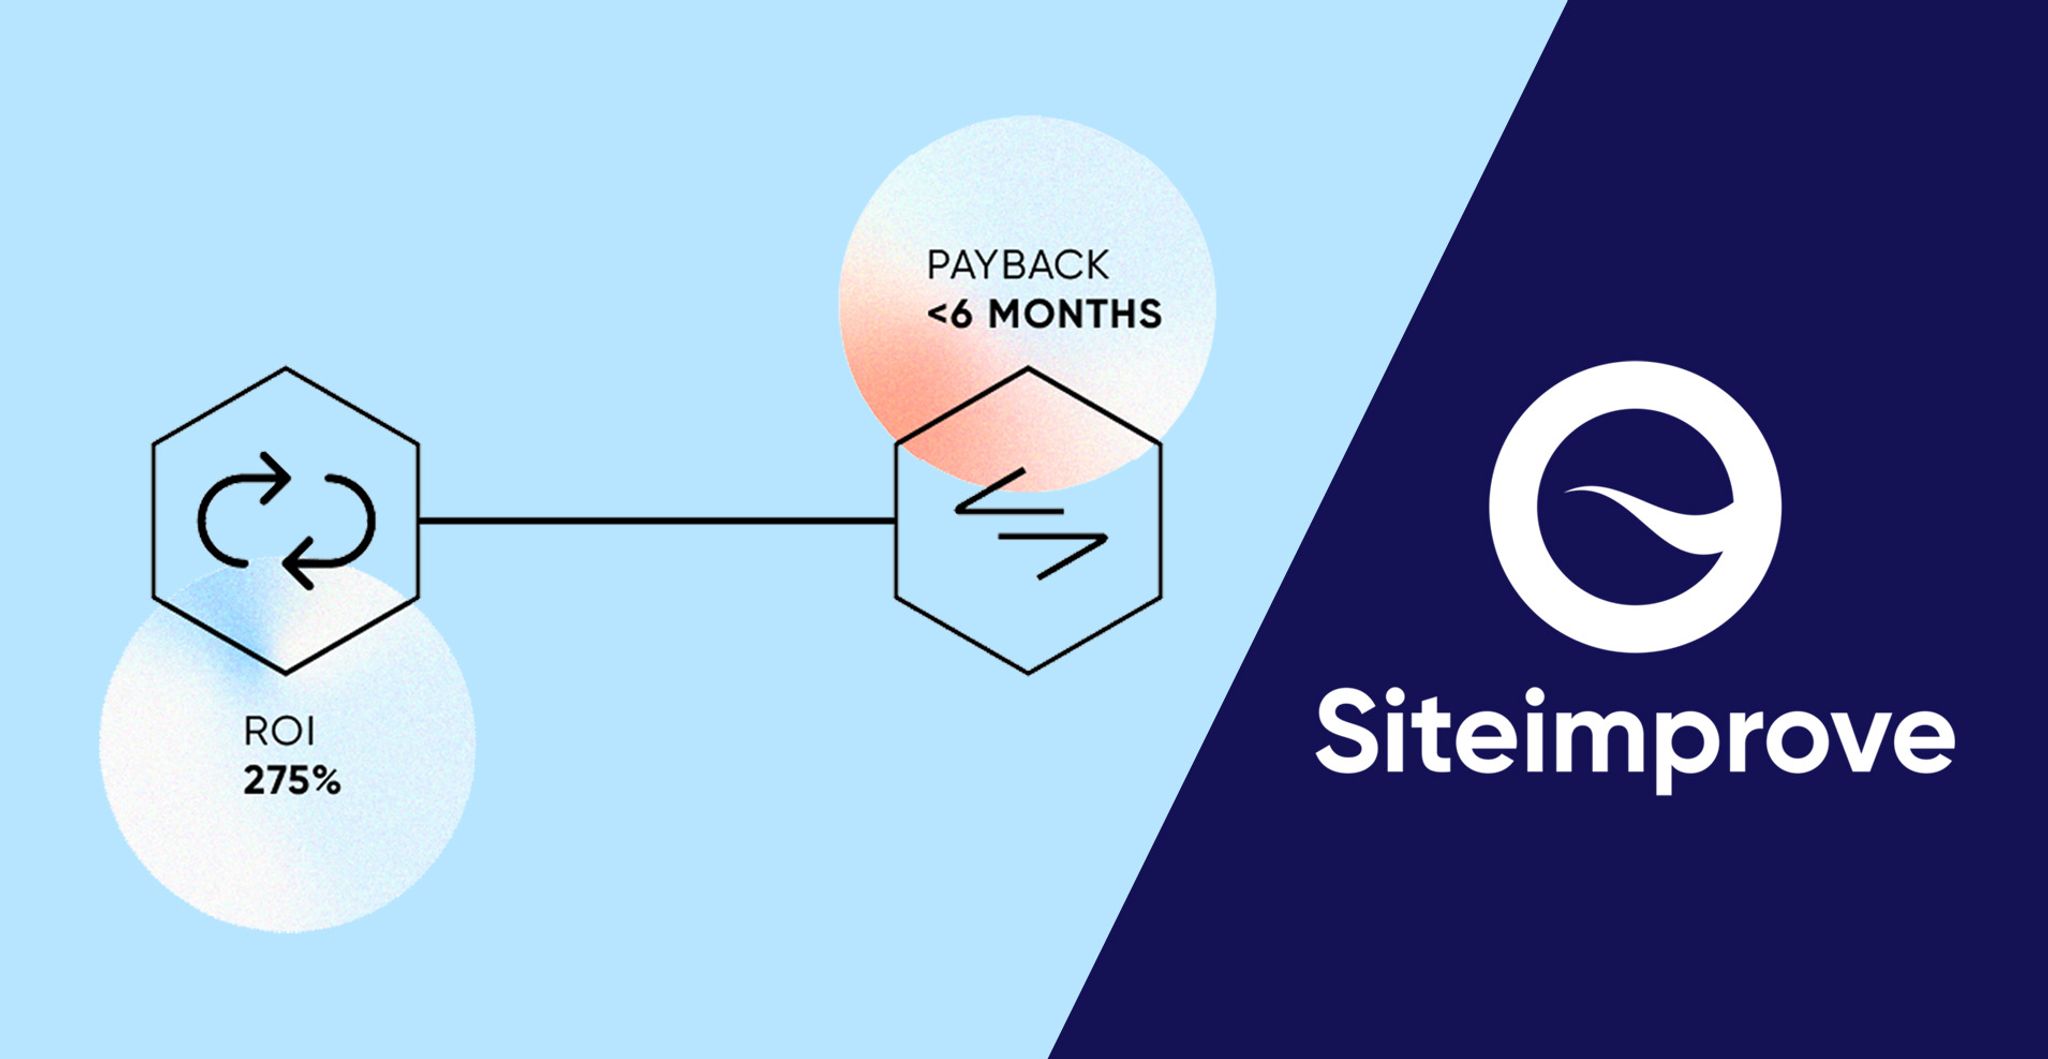 Image of Siteimprove logo with graphic showing ROI and payback of less than 6 months